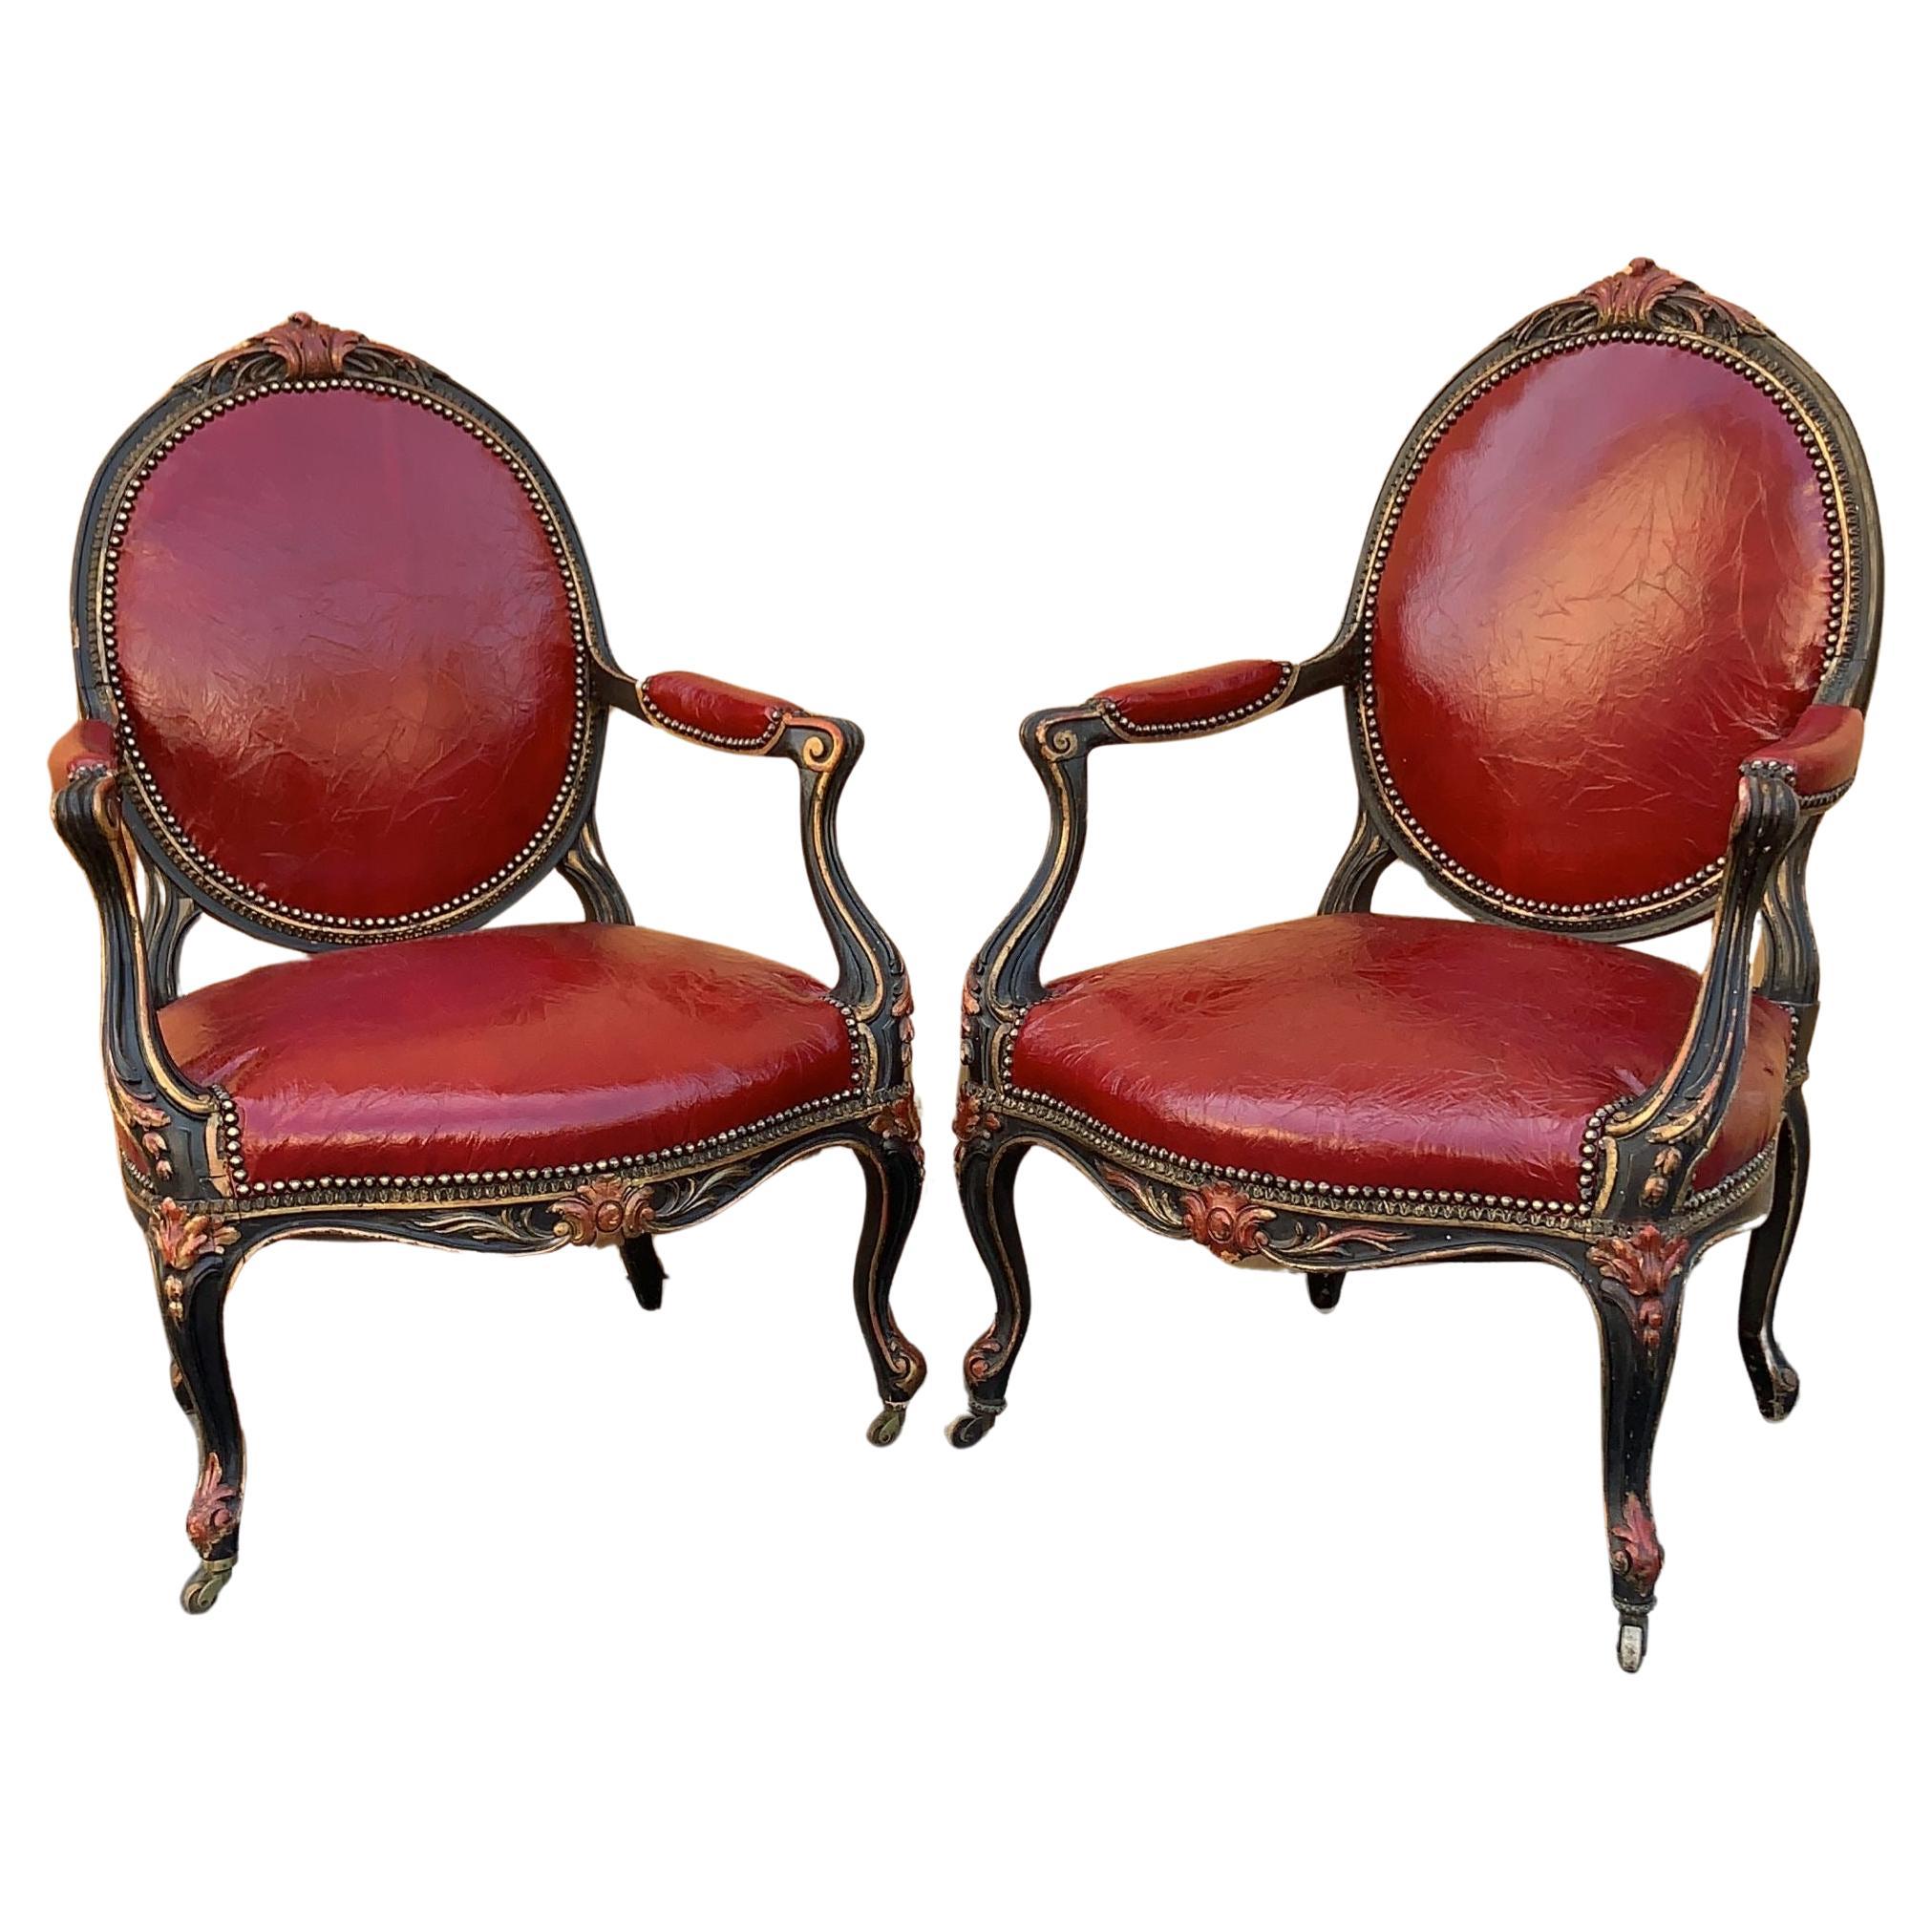 Antique French Napoleon III Carved Armchairs Newly Upholstered In Leather - Pair